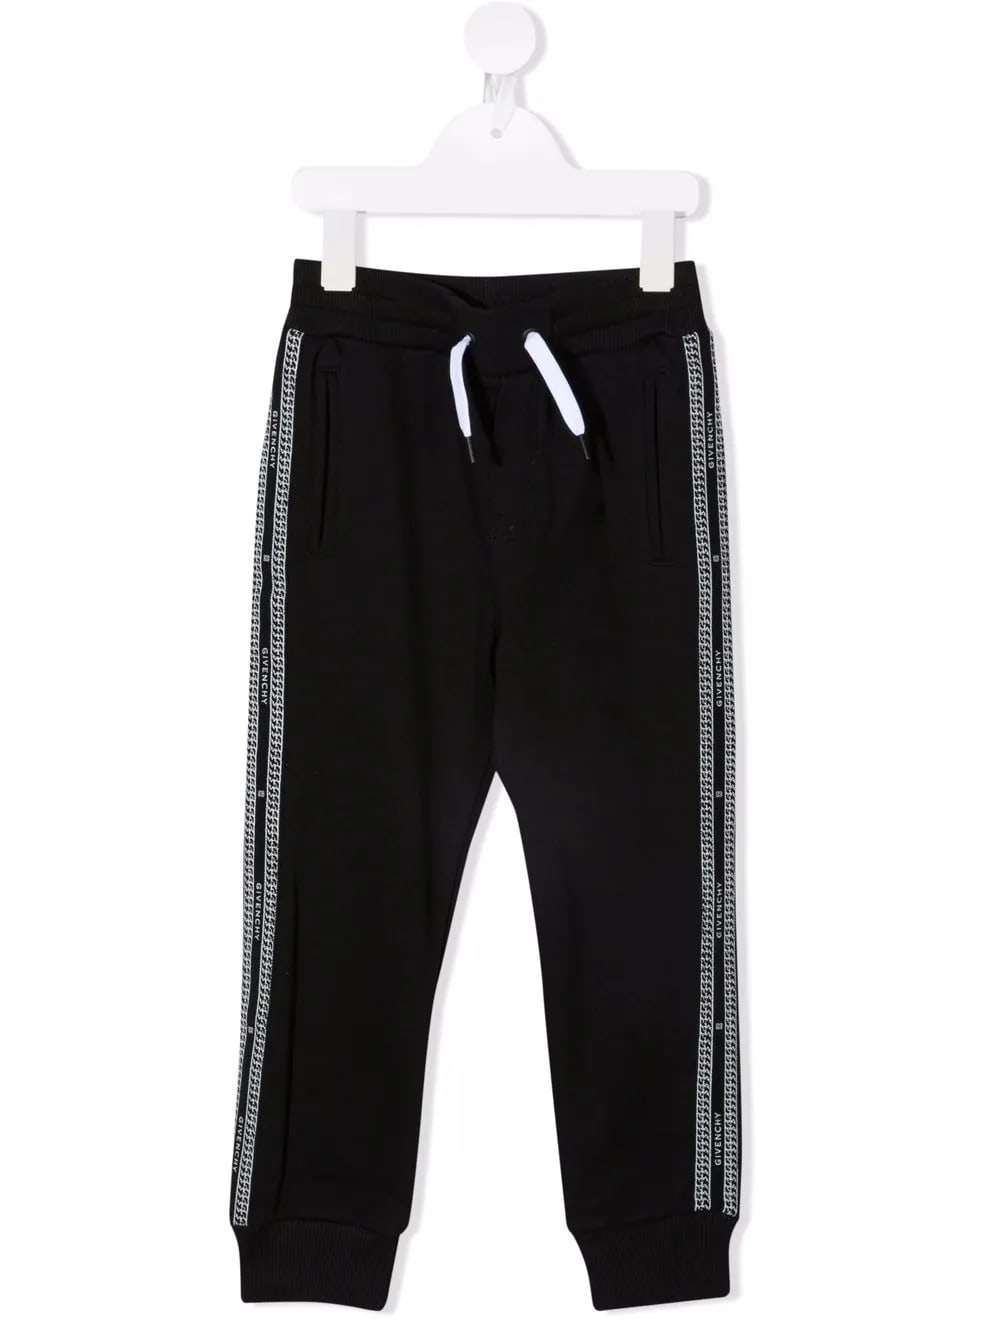 Givenchy Black Kids Joggers With White G Chain Motif